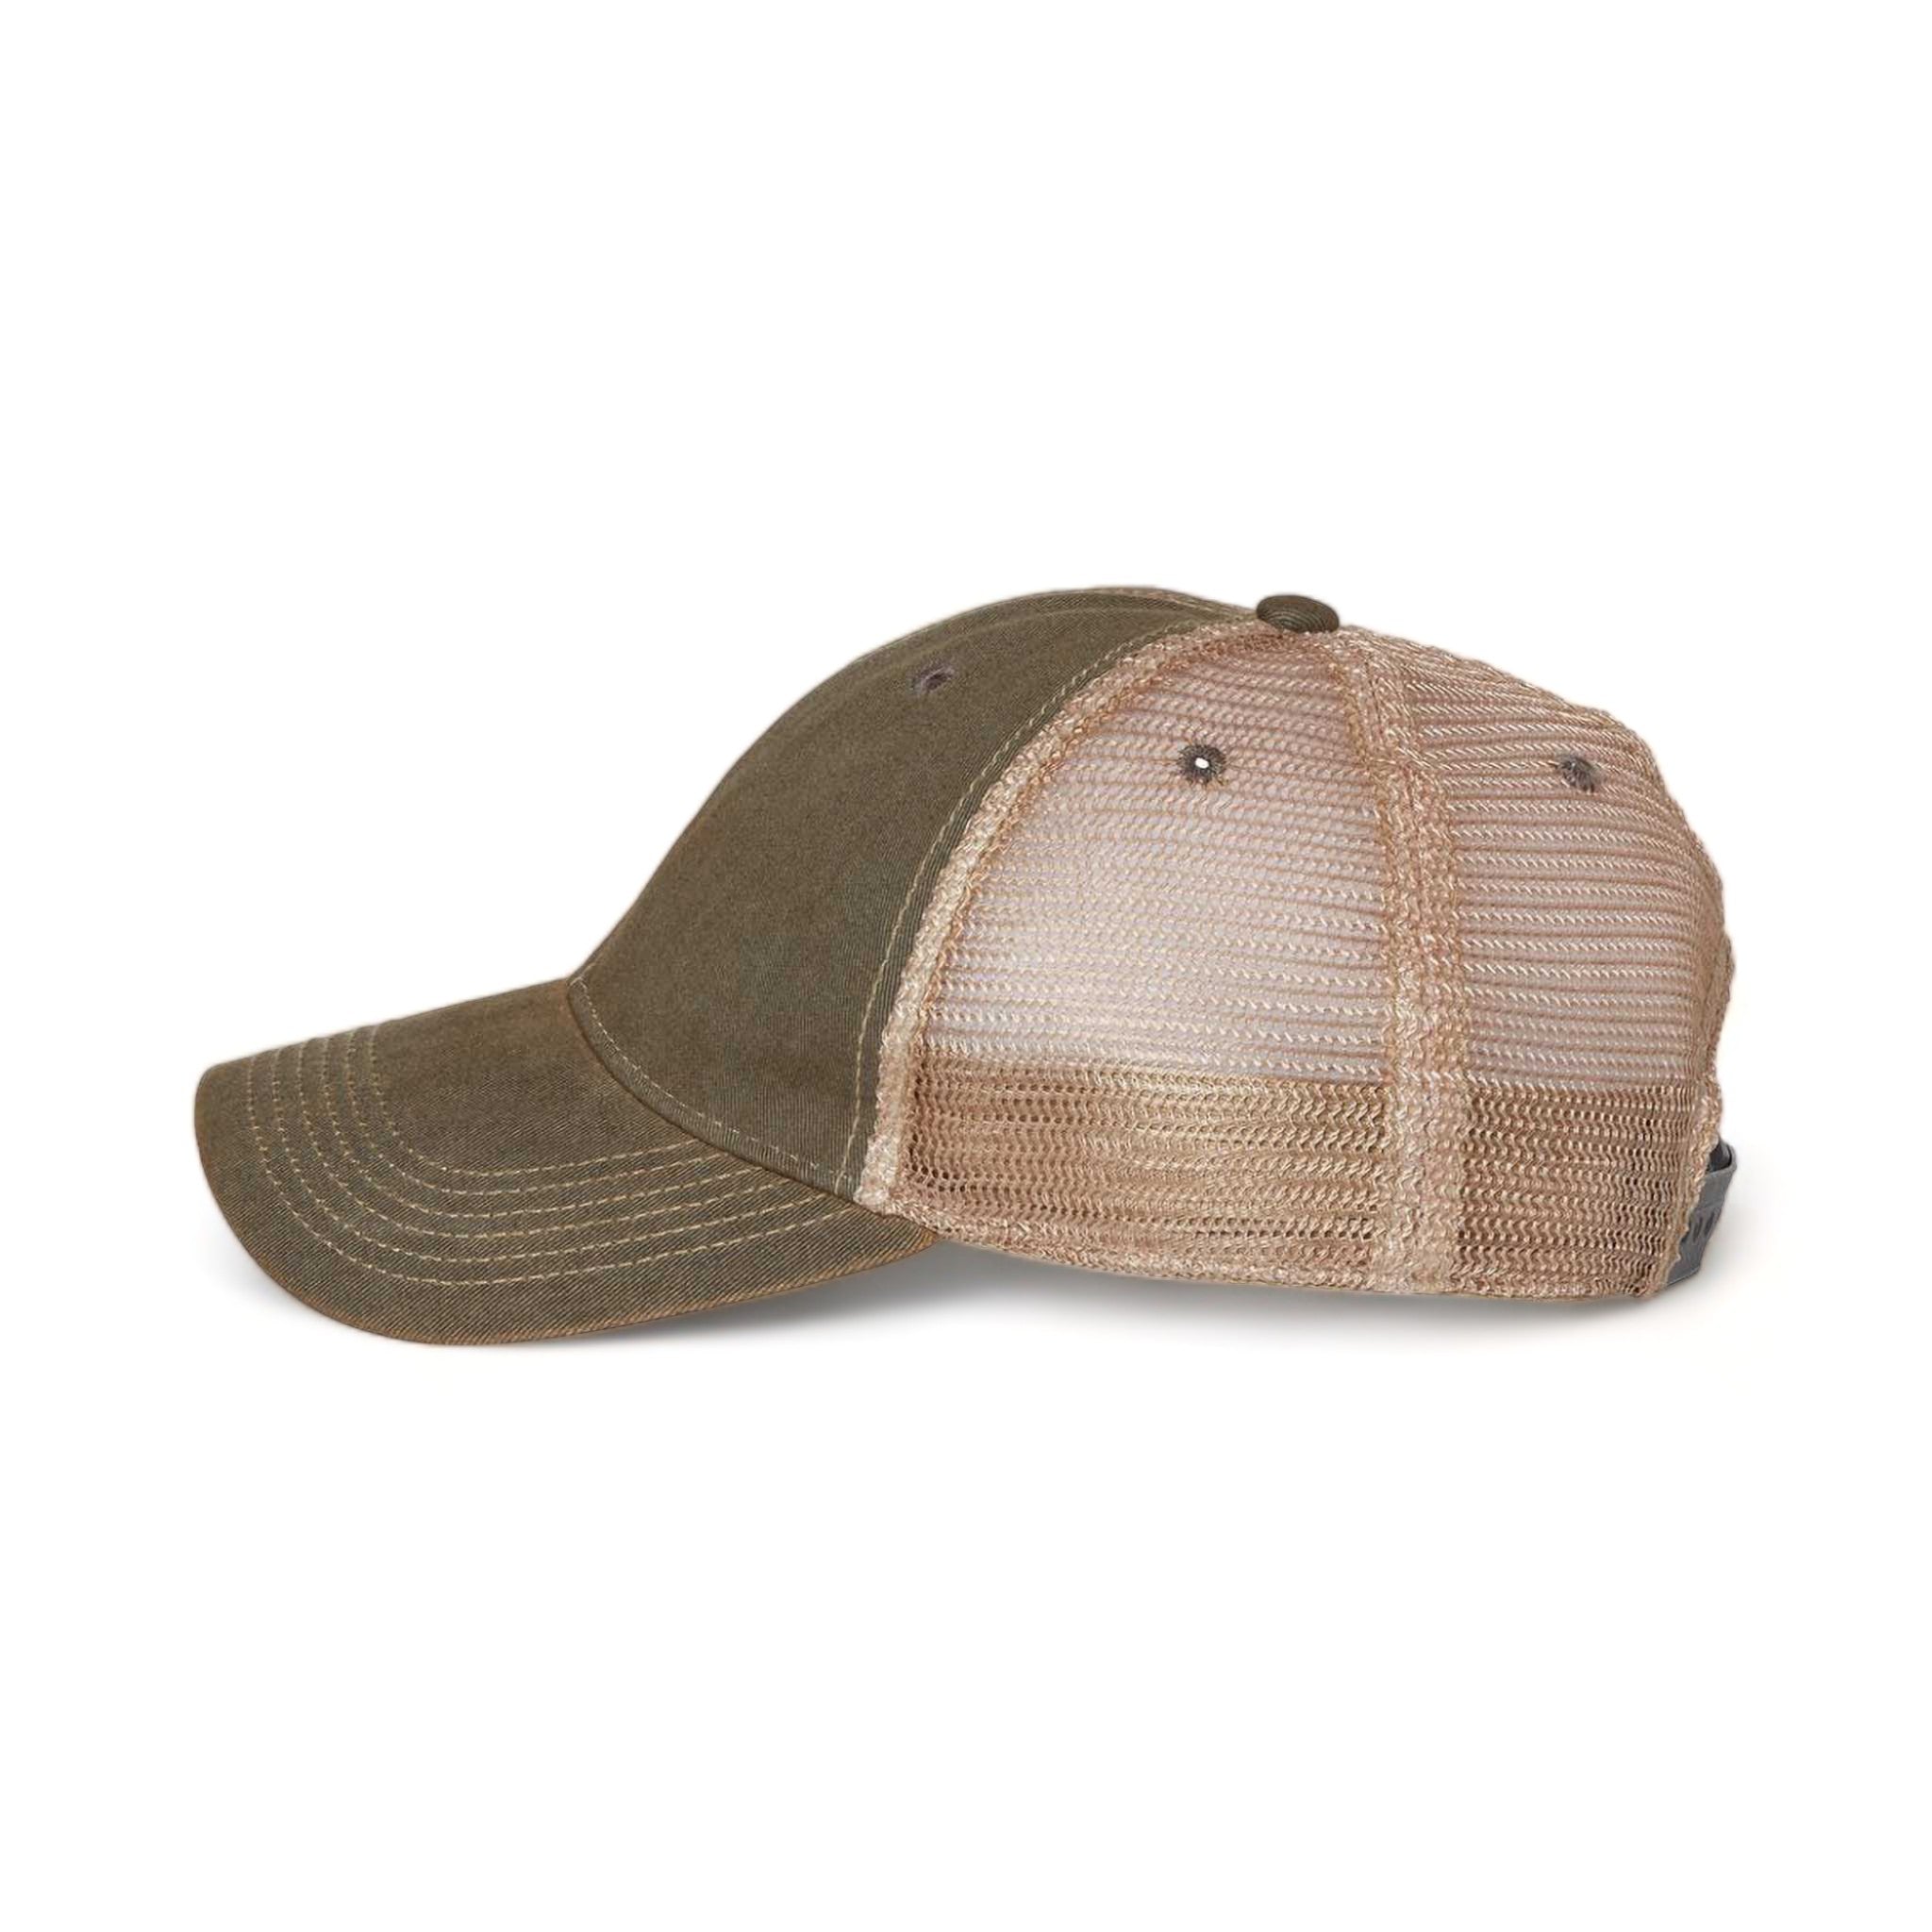 Side view of LEGACY OFA custom hat in grey and khaki